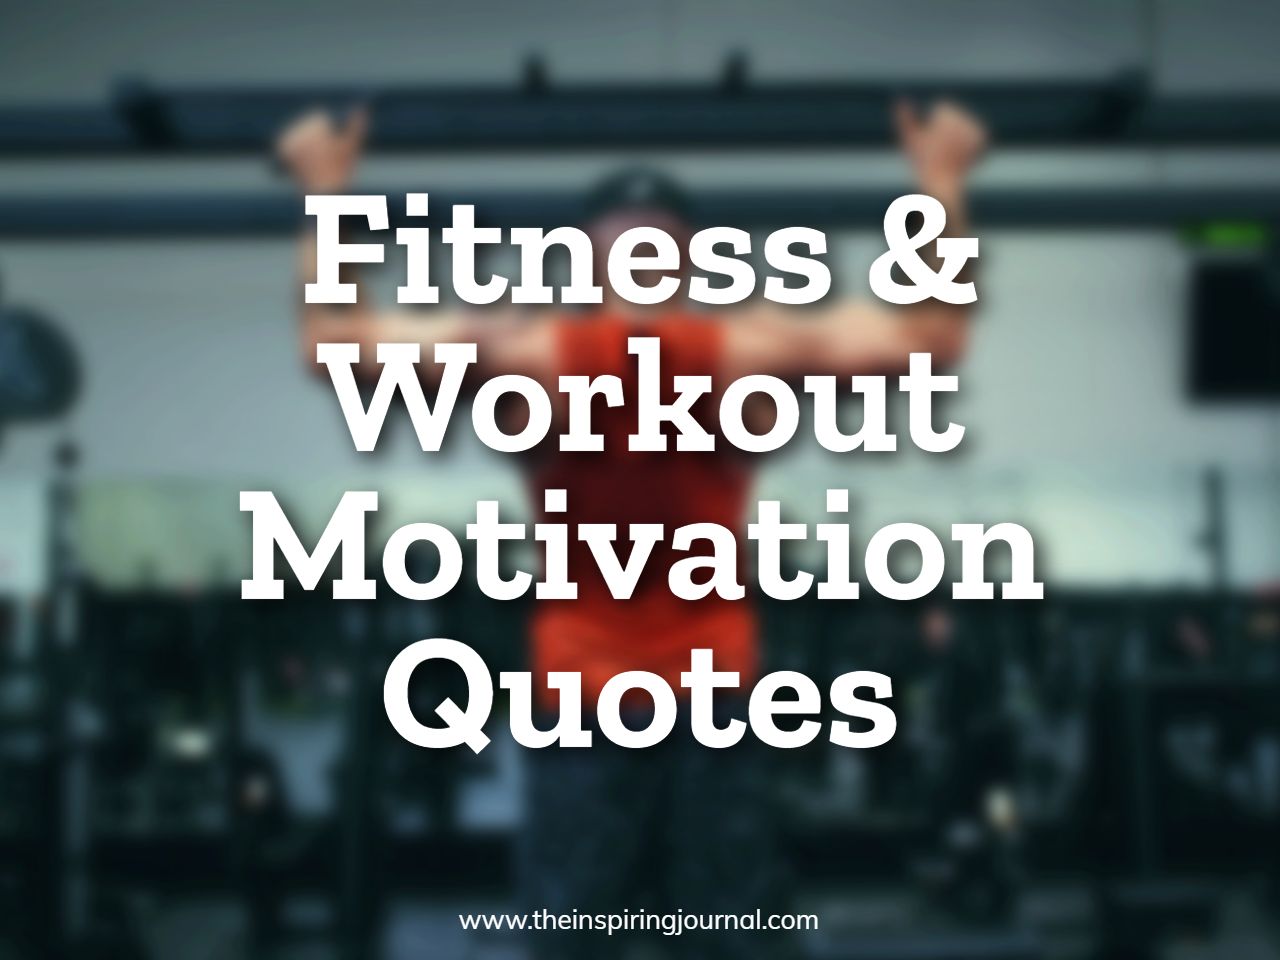 61 Best Fitness & Workout Motivation Quotes